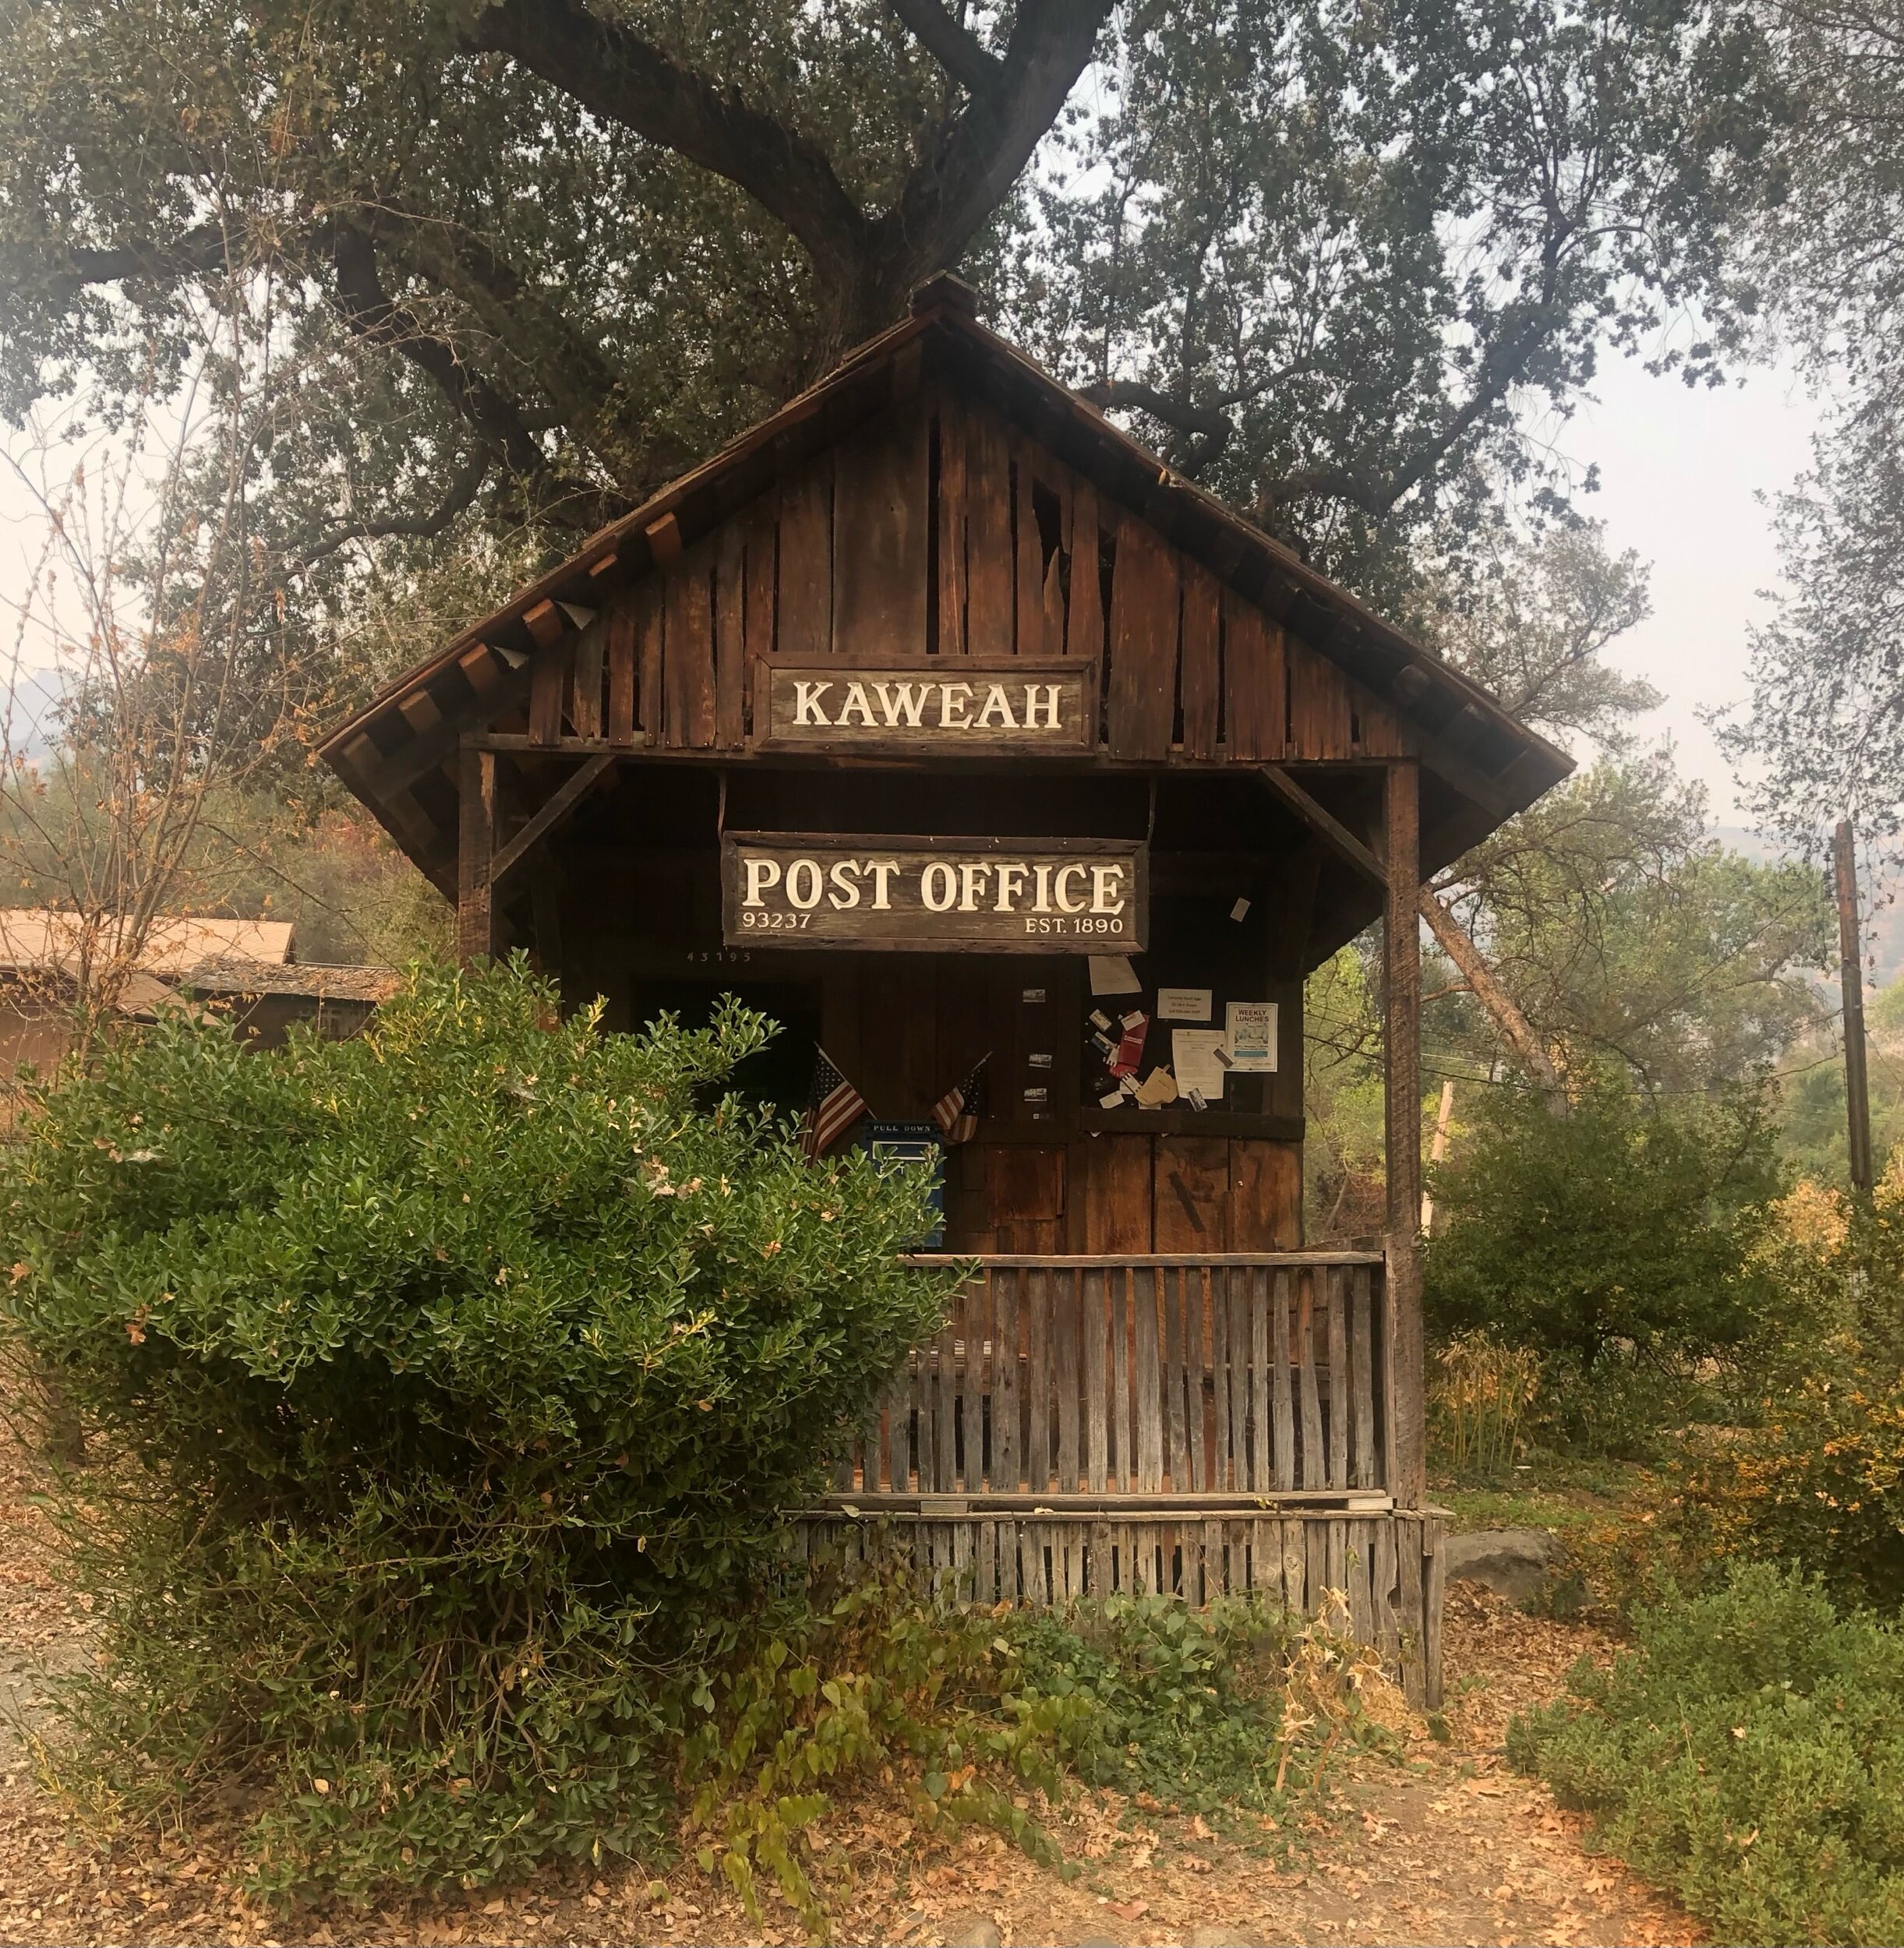   Kaweah's  still operational,   12 x 15-foot post office appears to lead the pack in the  Oddest Origin  category. Someone even wrote a book specifically about this community and the social experiment involving 500 non-conformists   from San Francis